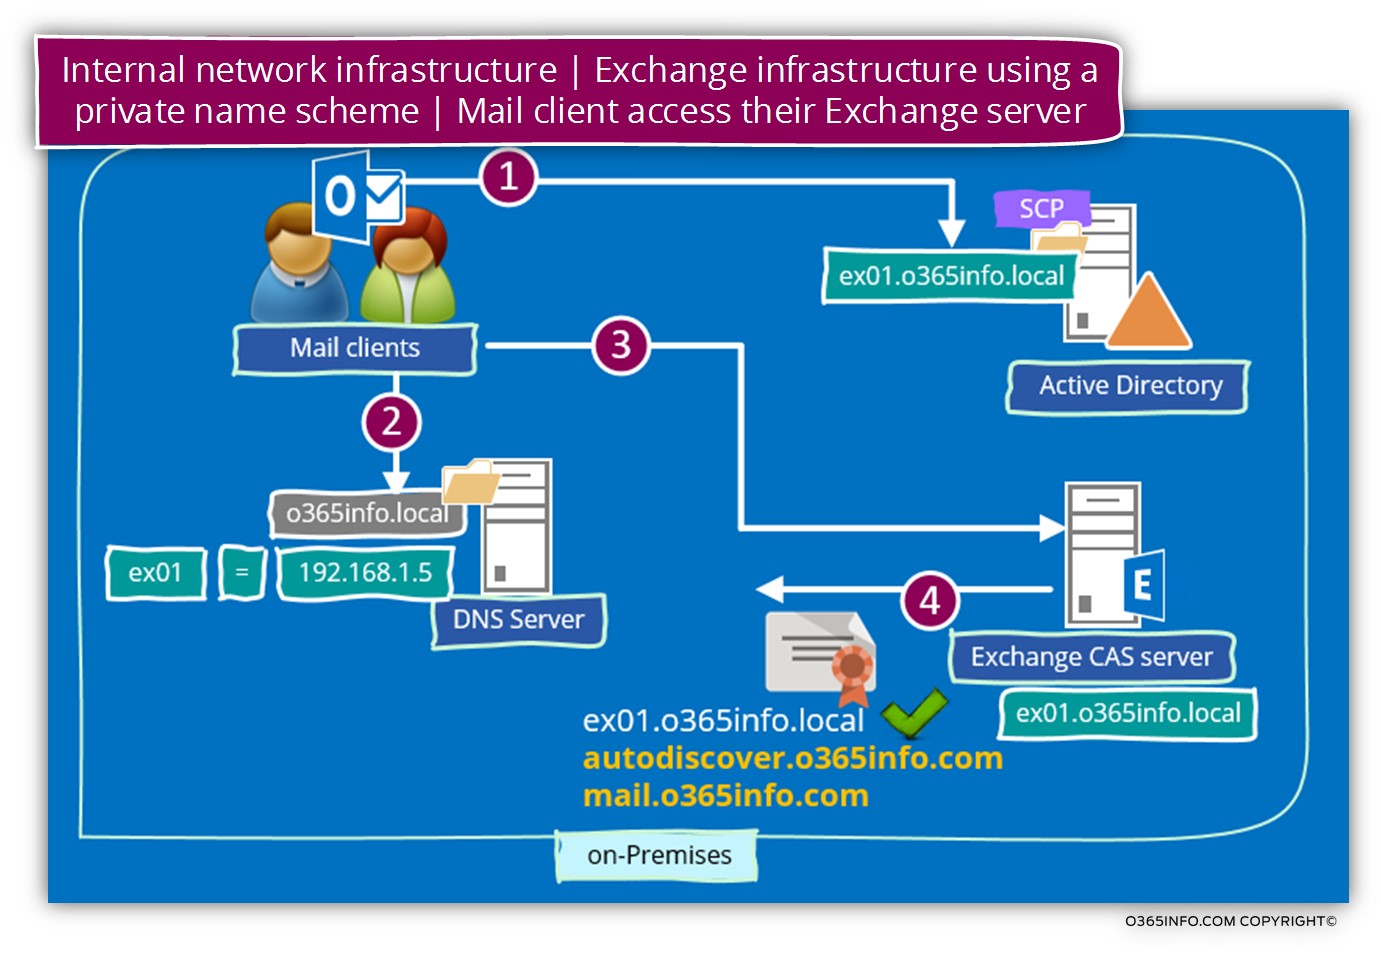 Internal network infrastructure - Exchange infrastructure using a private name scheme - Mail client access their Exchange server